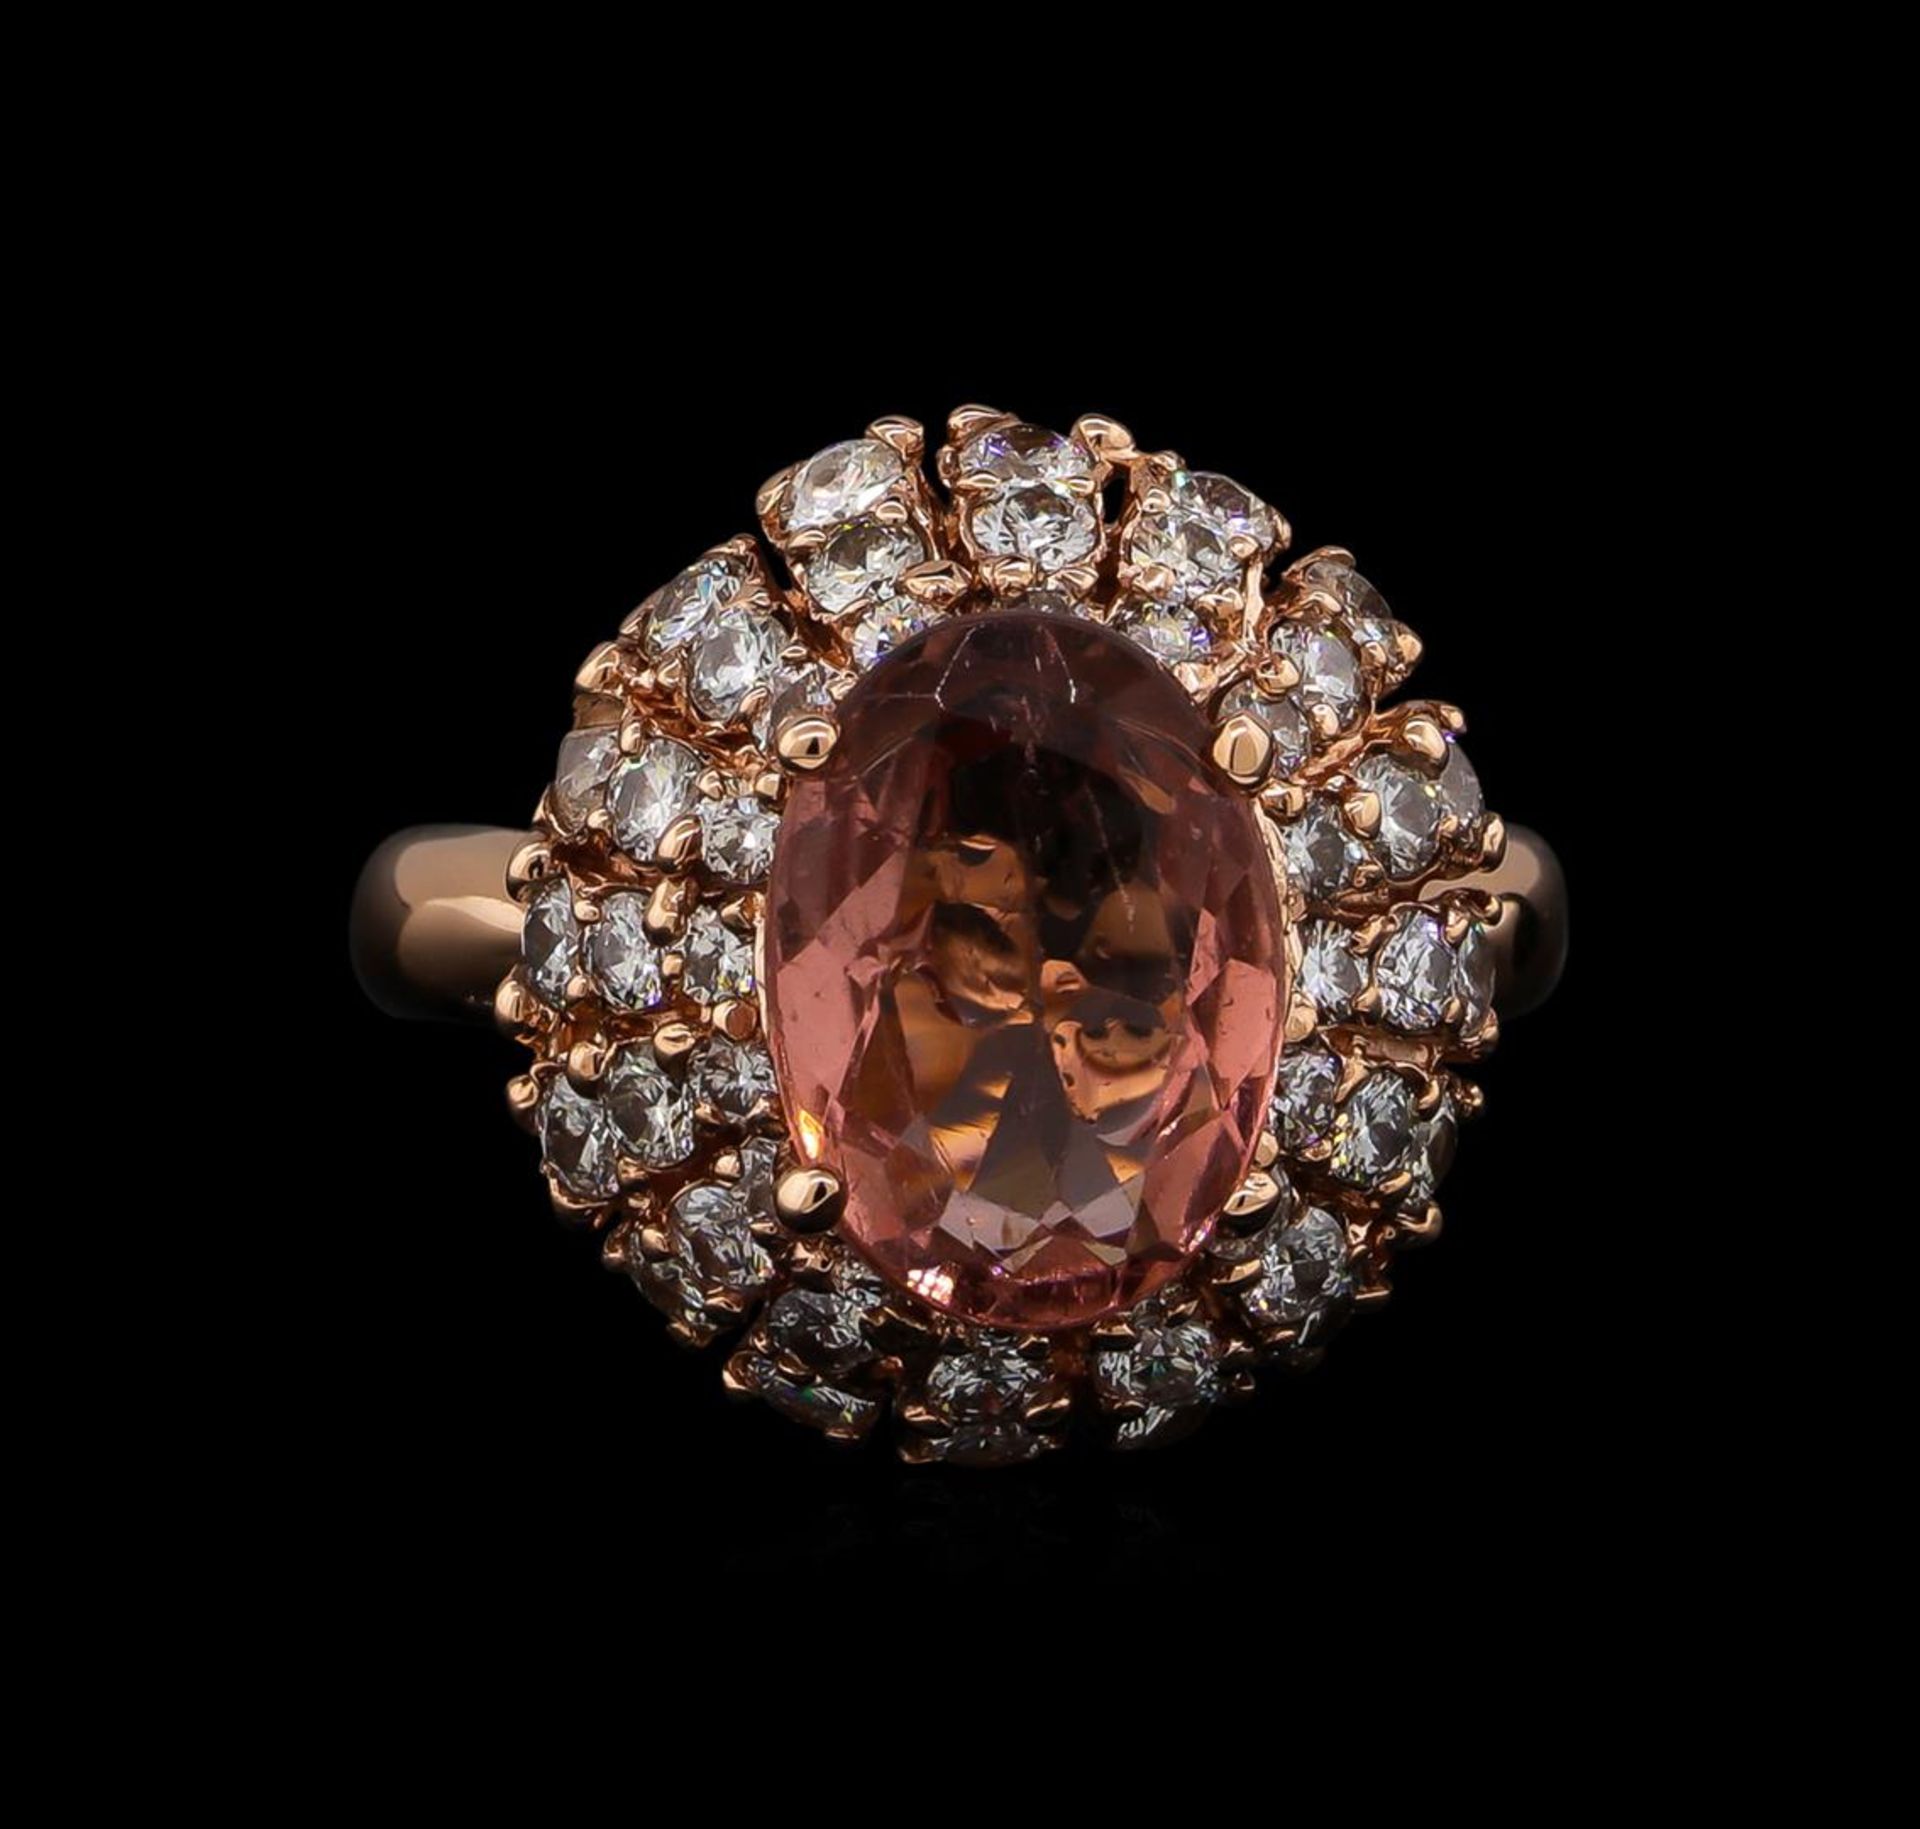 3.70ct Tourmaline and Diamond Ring - 14KT Rose Gold - Image 2 of 6